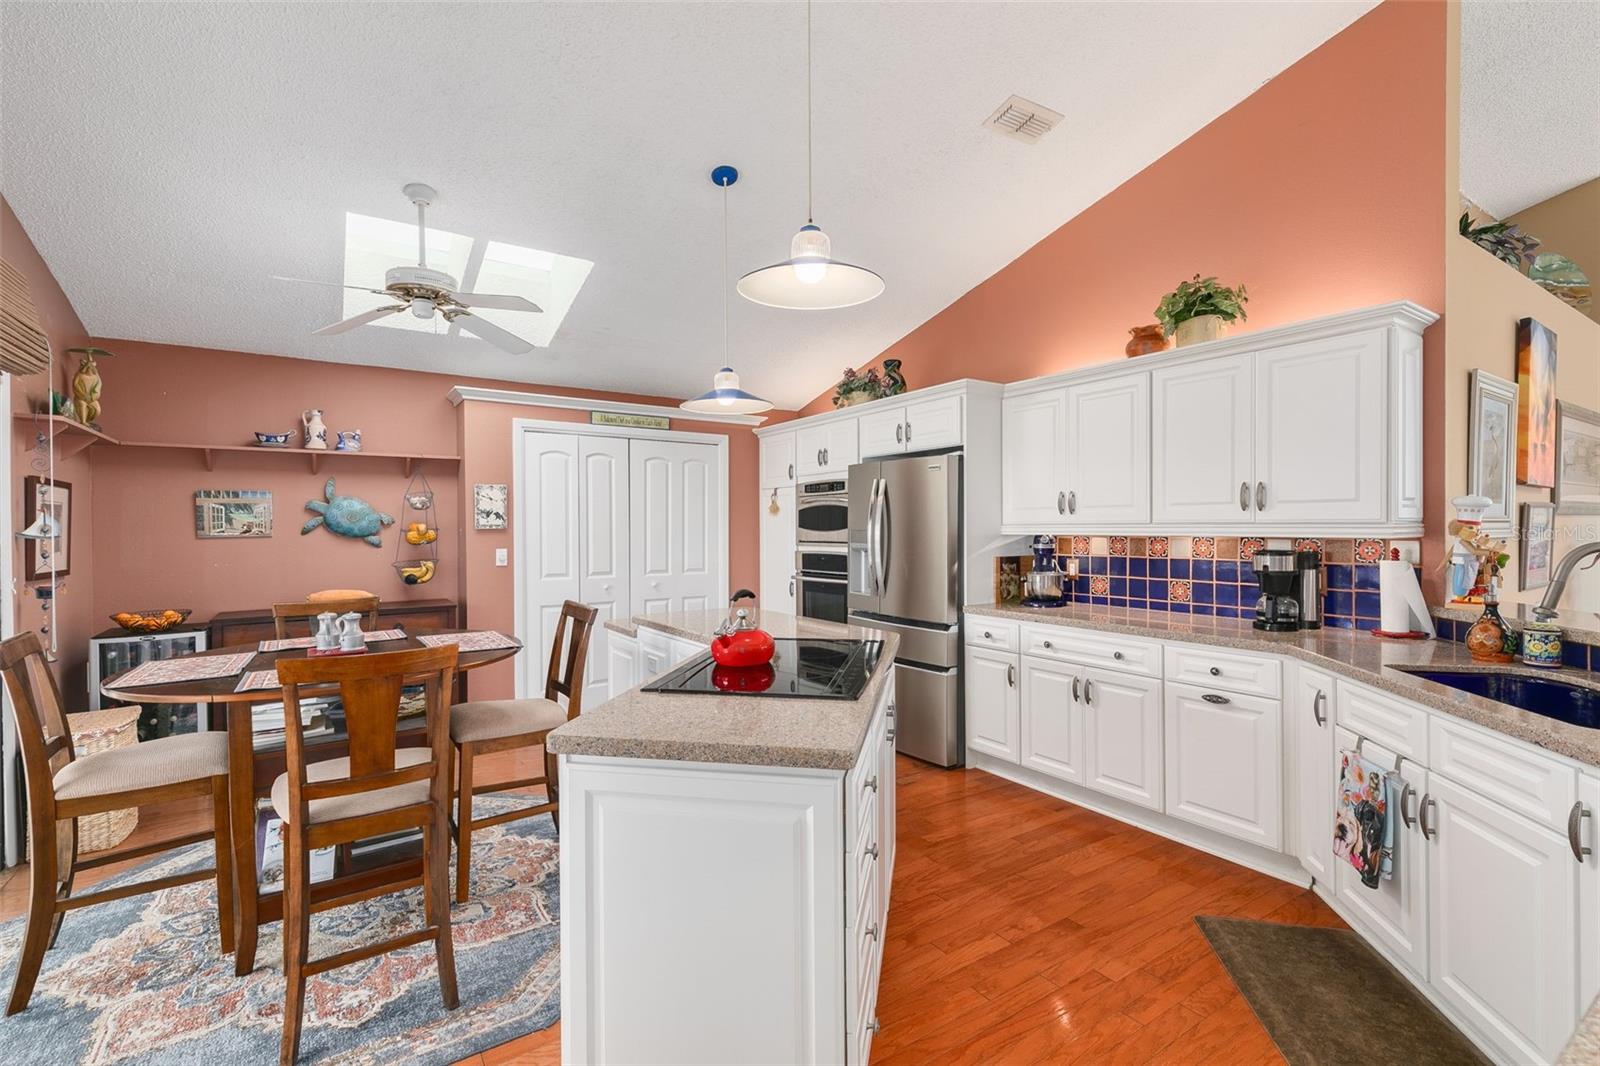 High End Appliances, abundant cabinet and pantry space. Eat in kitchen